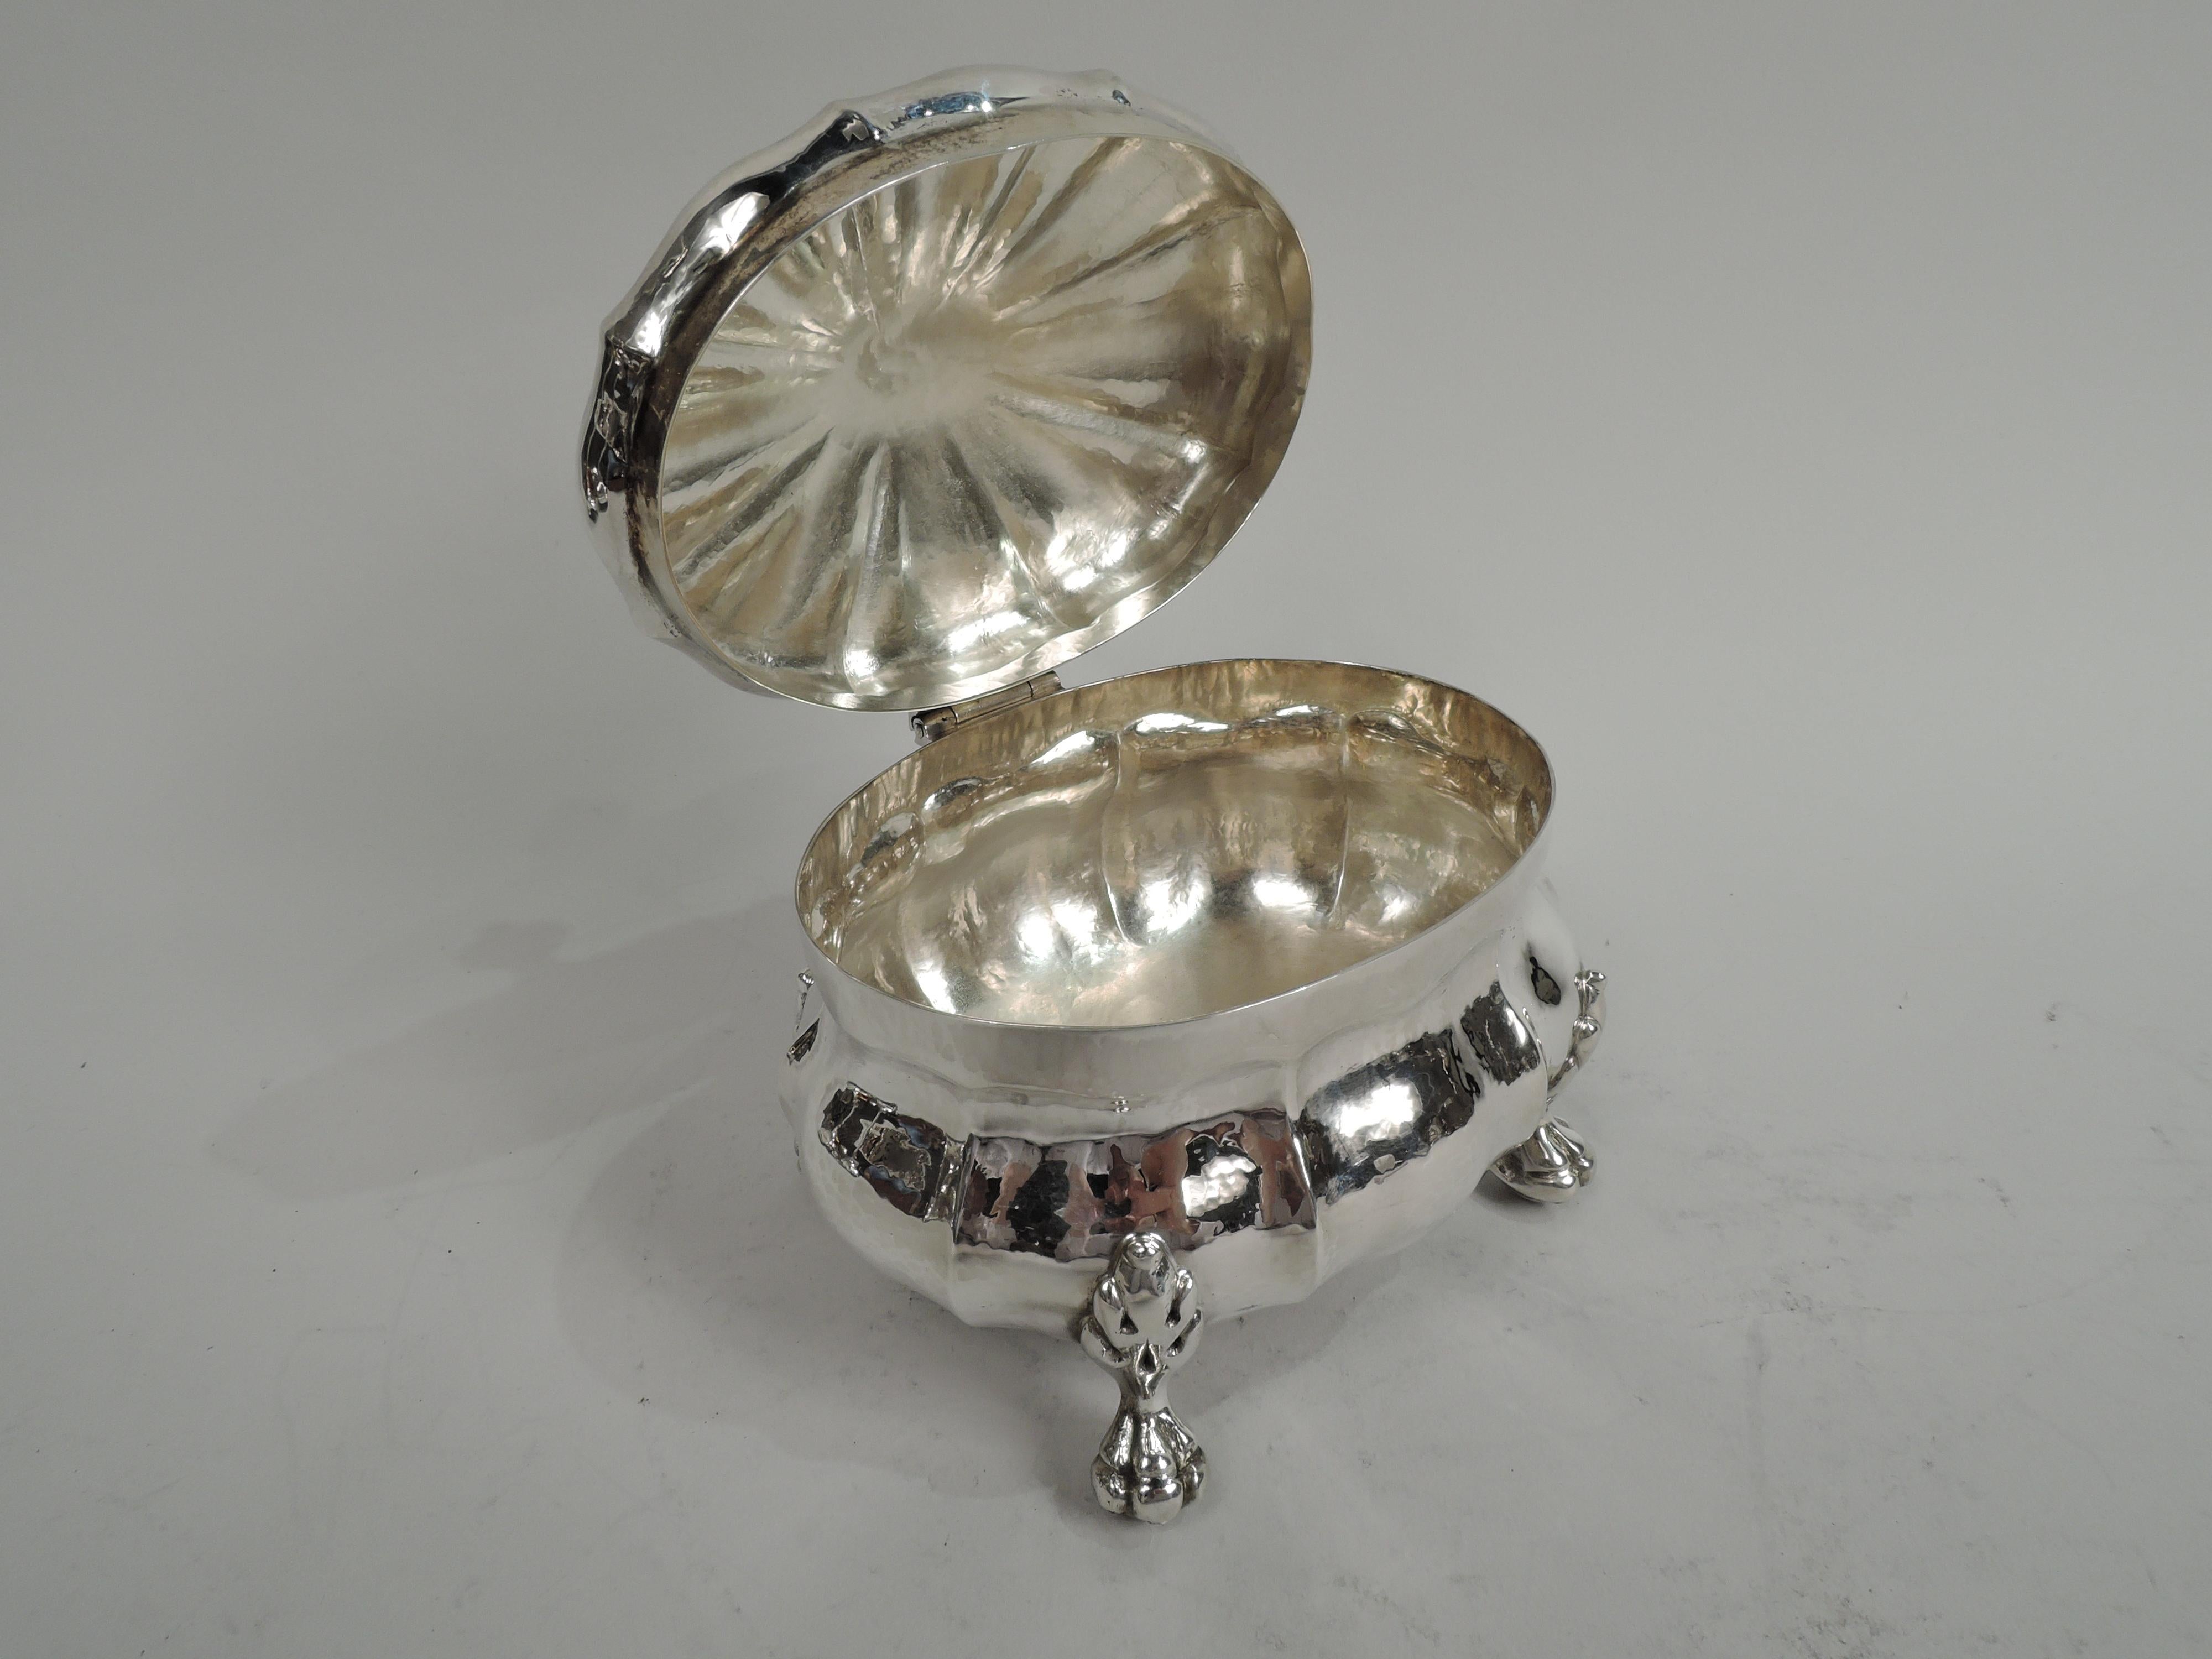 Modern Classical sterling silver box. Made by Buccellati in Italy. Lobed and bellied ovoid bowl. Cover hinged with radiating flutes and vasiform finial. Four leaf-mounted paw supports. Marked “Italy Buccellati Sterling”. Weight: 11.8 troy ounces.